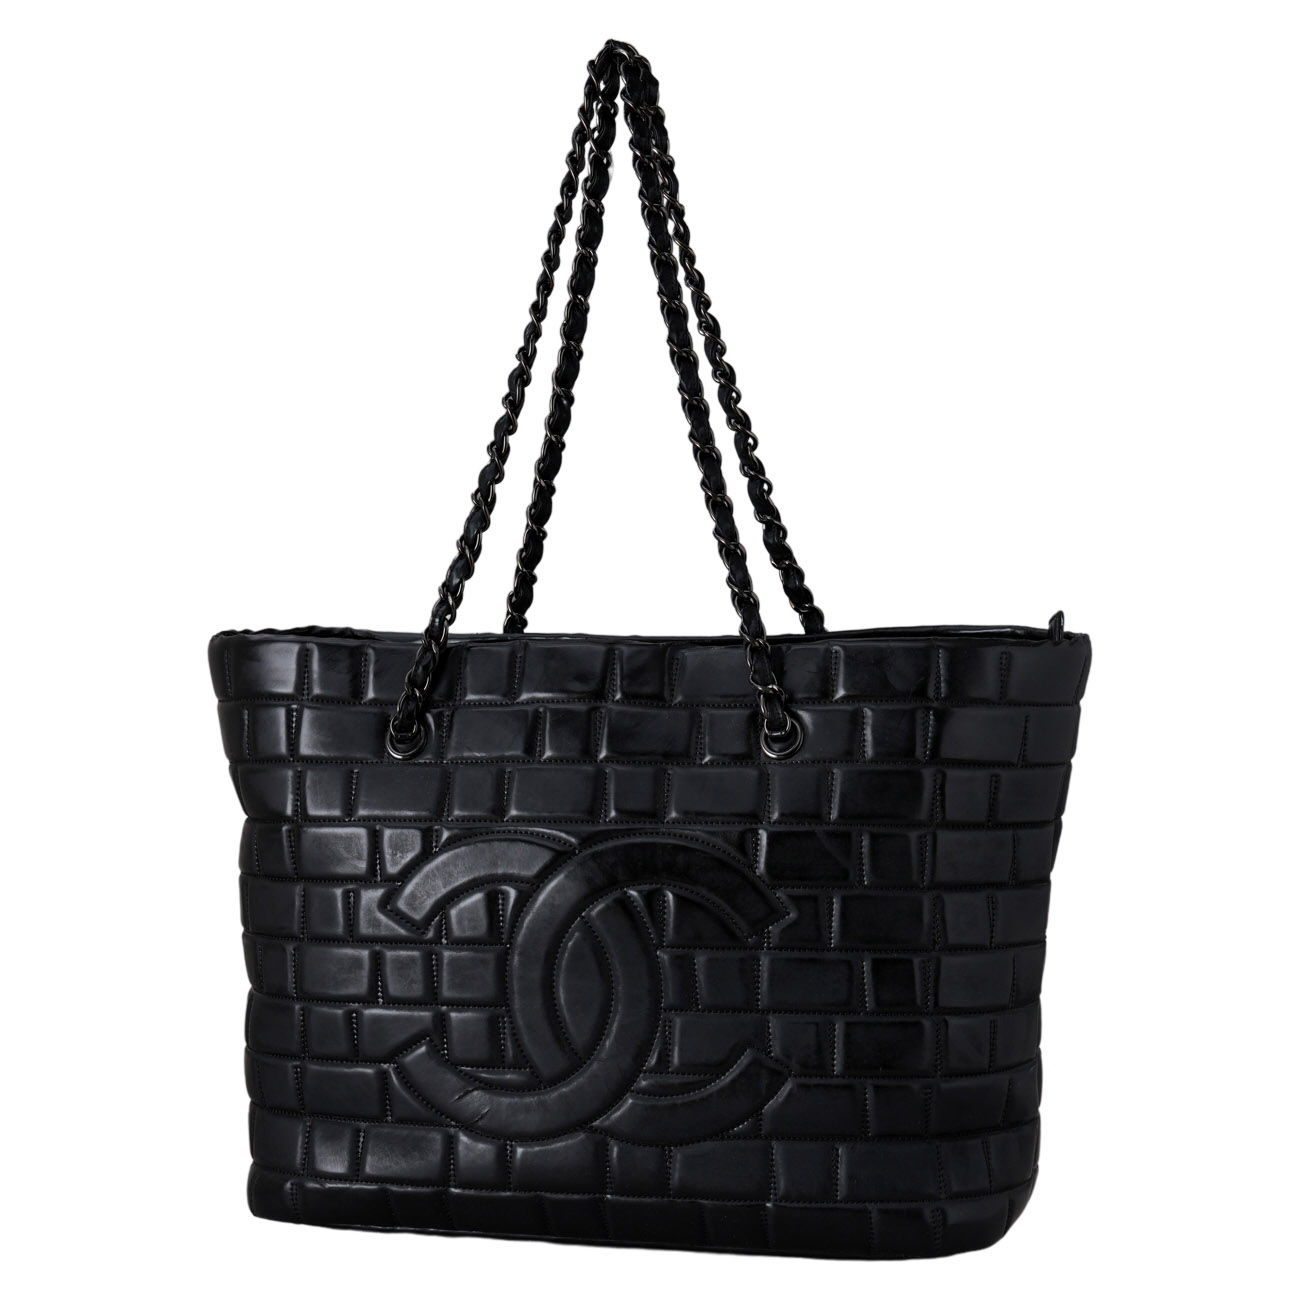 CHANEL(USED)샤넬 시즌 쇼퍼백